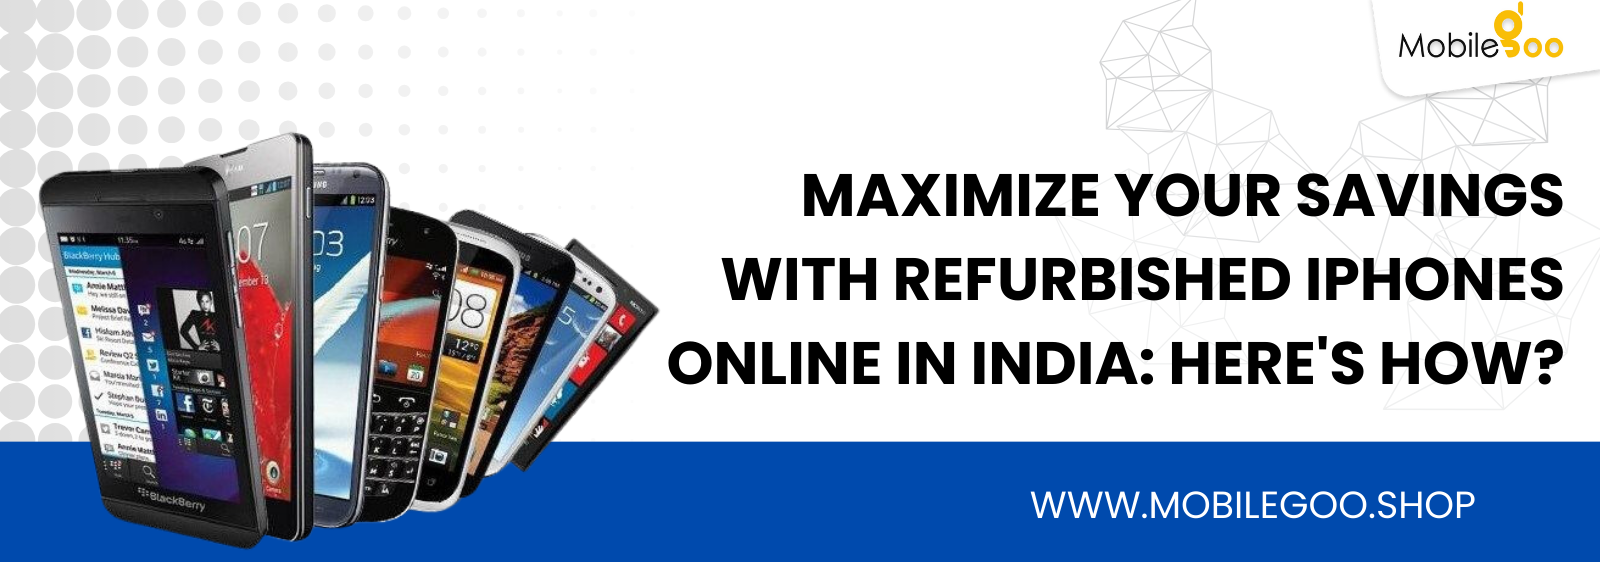 Maximize Your Savings with Refurbished iPhones Online in India: Here's How?